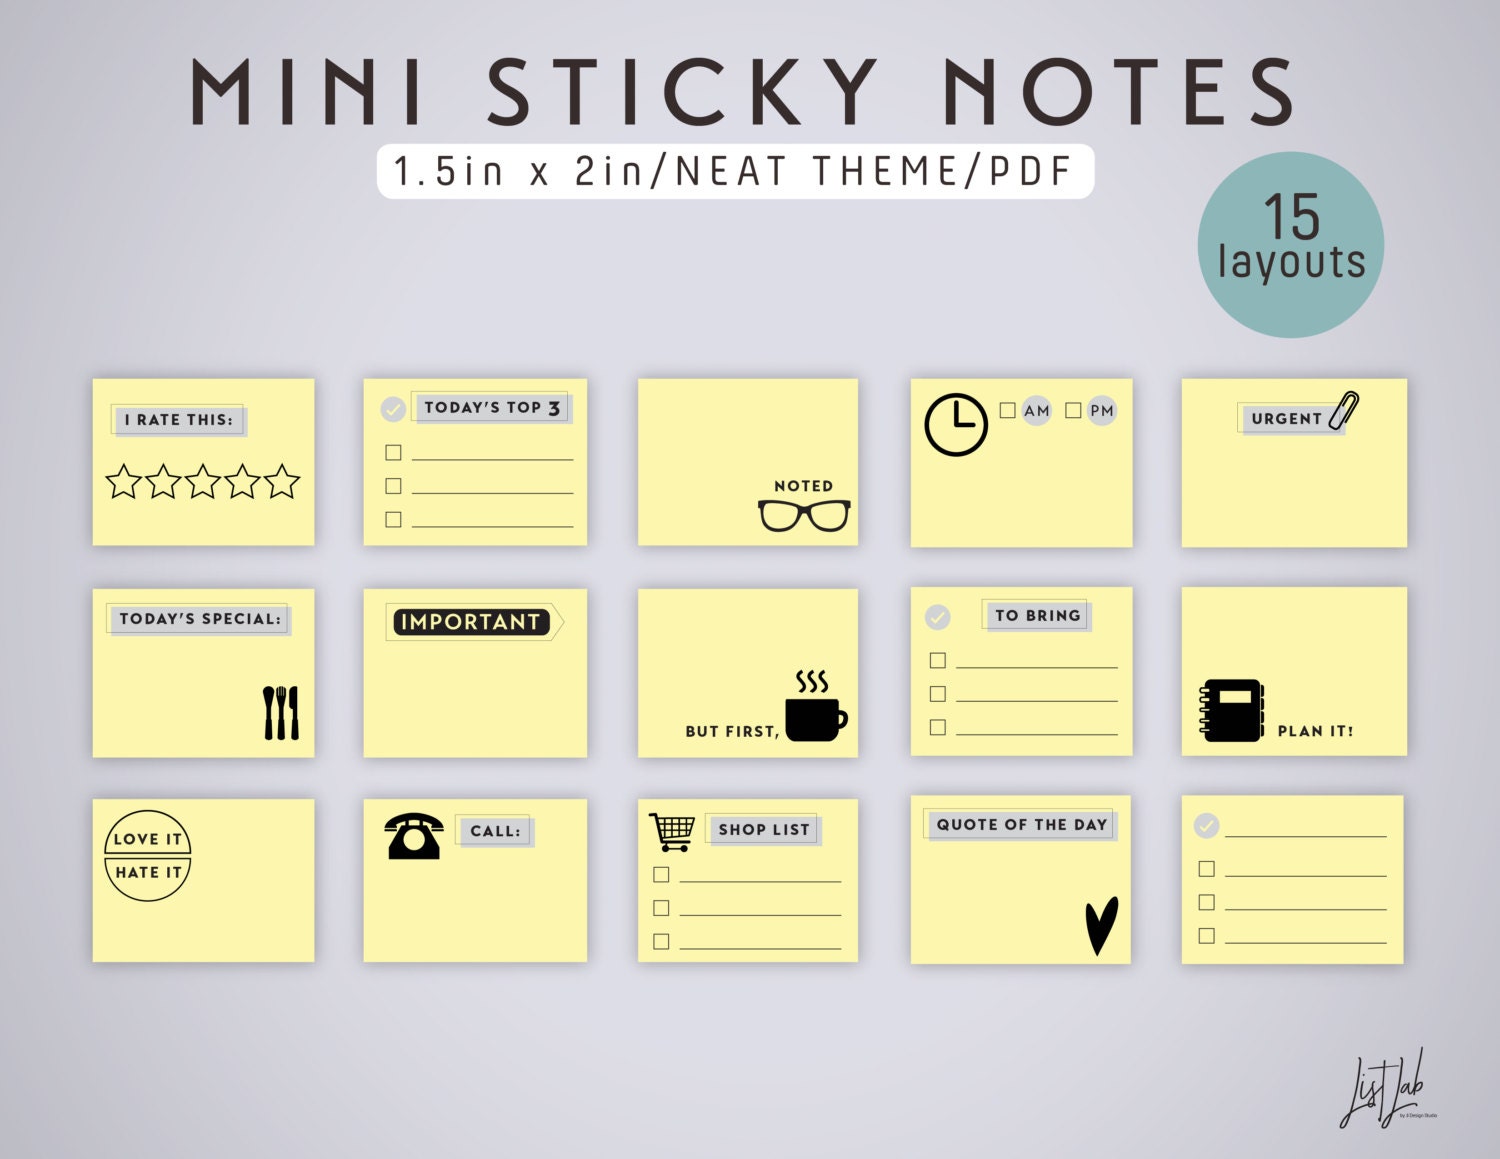 MINI STICKY Notes Printable PDF Fits 1.5in by 2in Notepads 